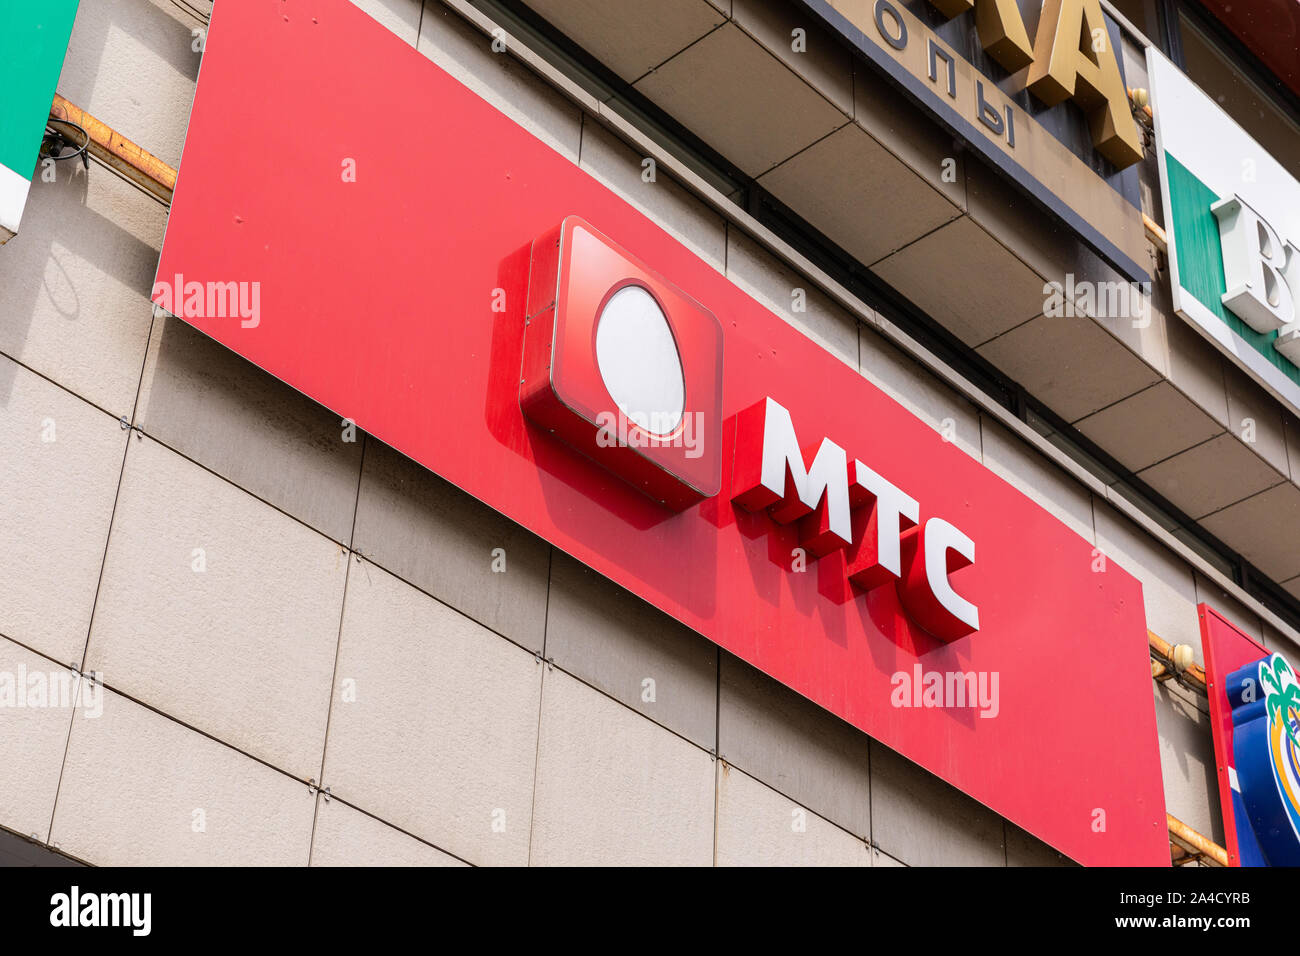 Minsk, Belarus - July 17, 2019: MTS service centre logo board on building facade. MTS is Russian telecommunications company providing services in Stock Photo